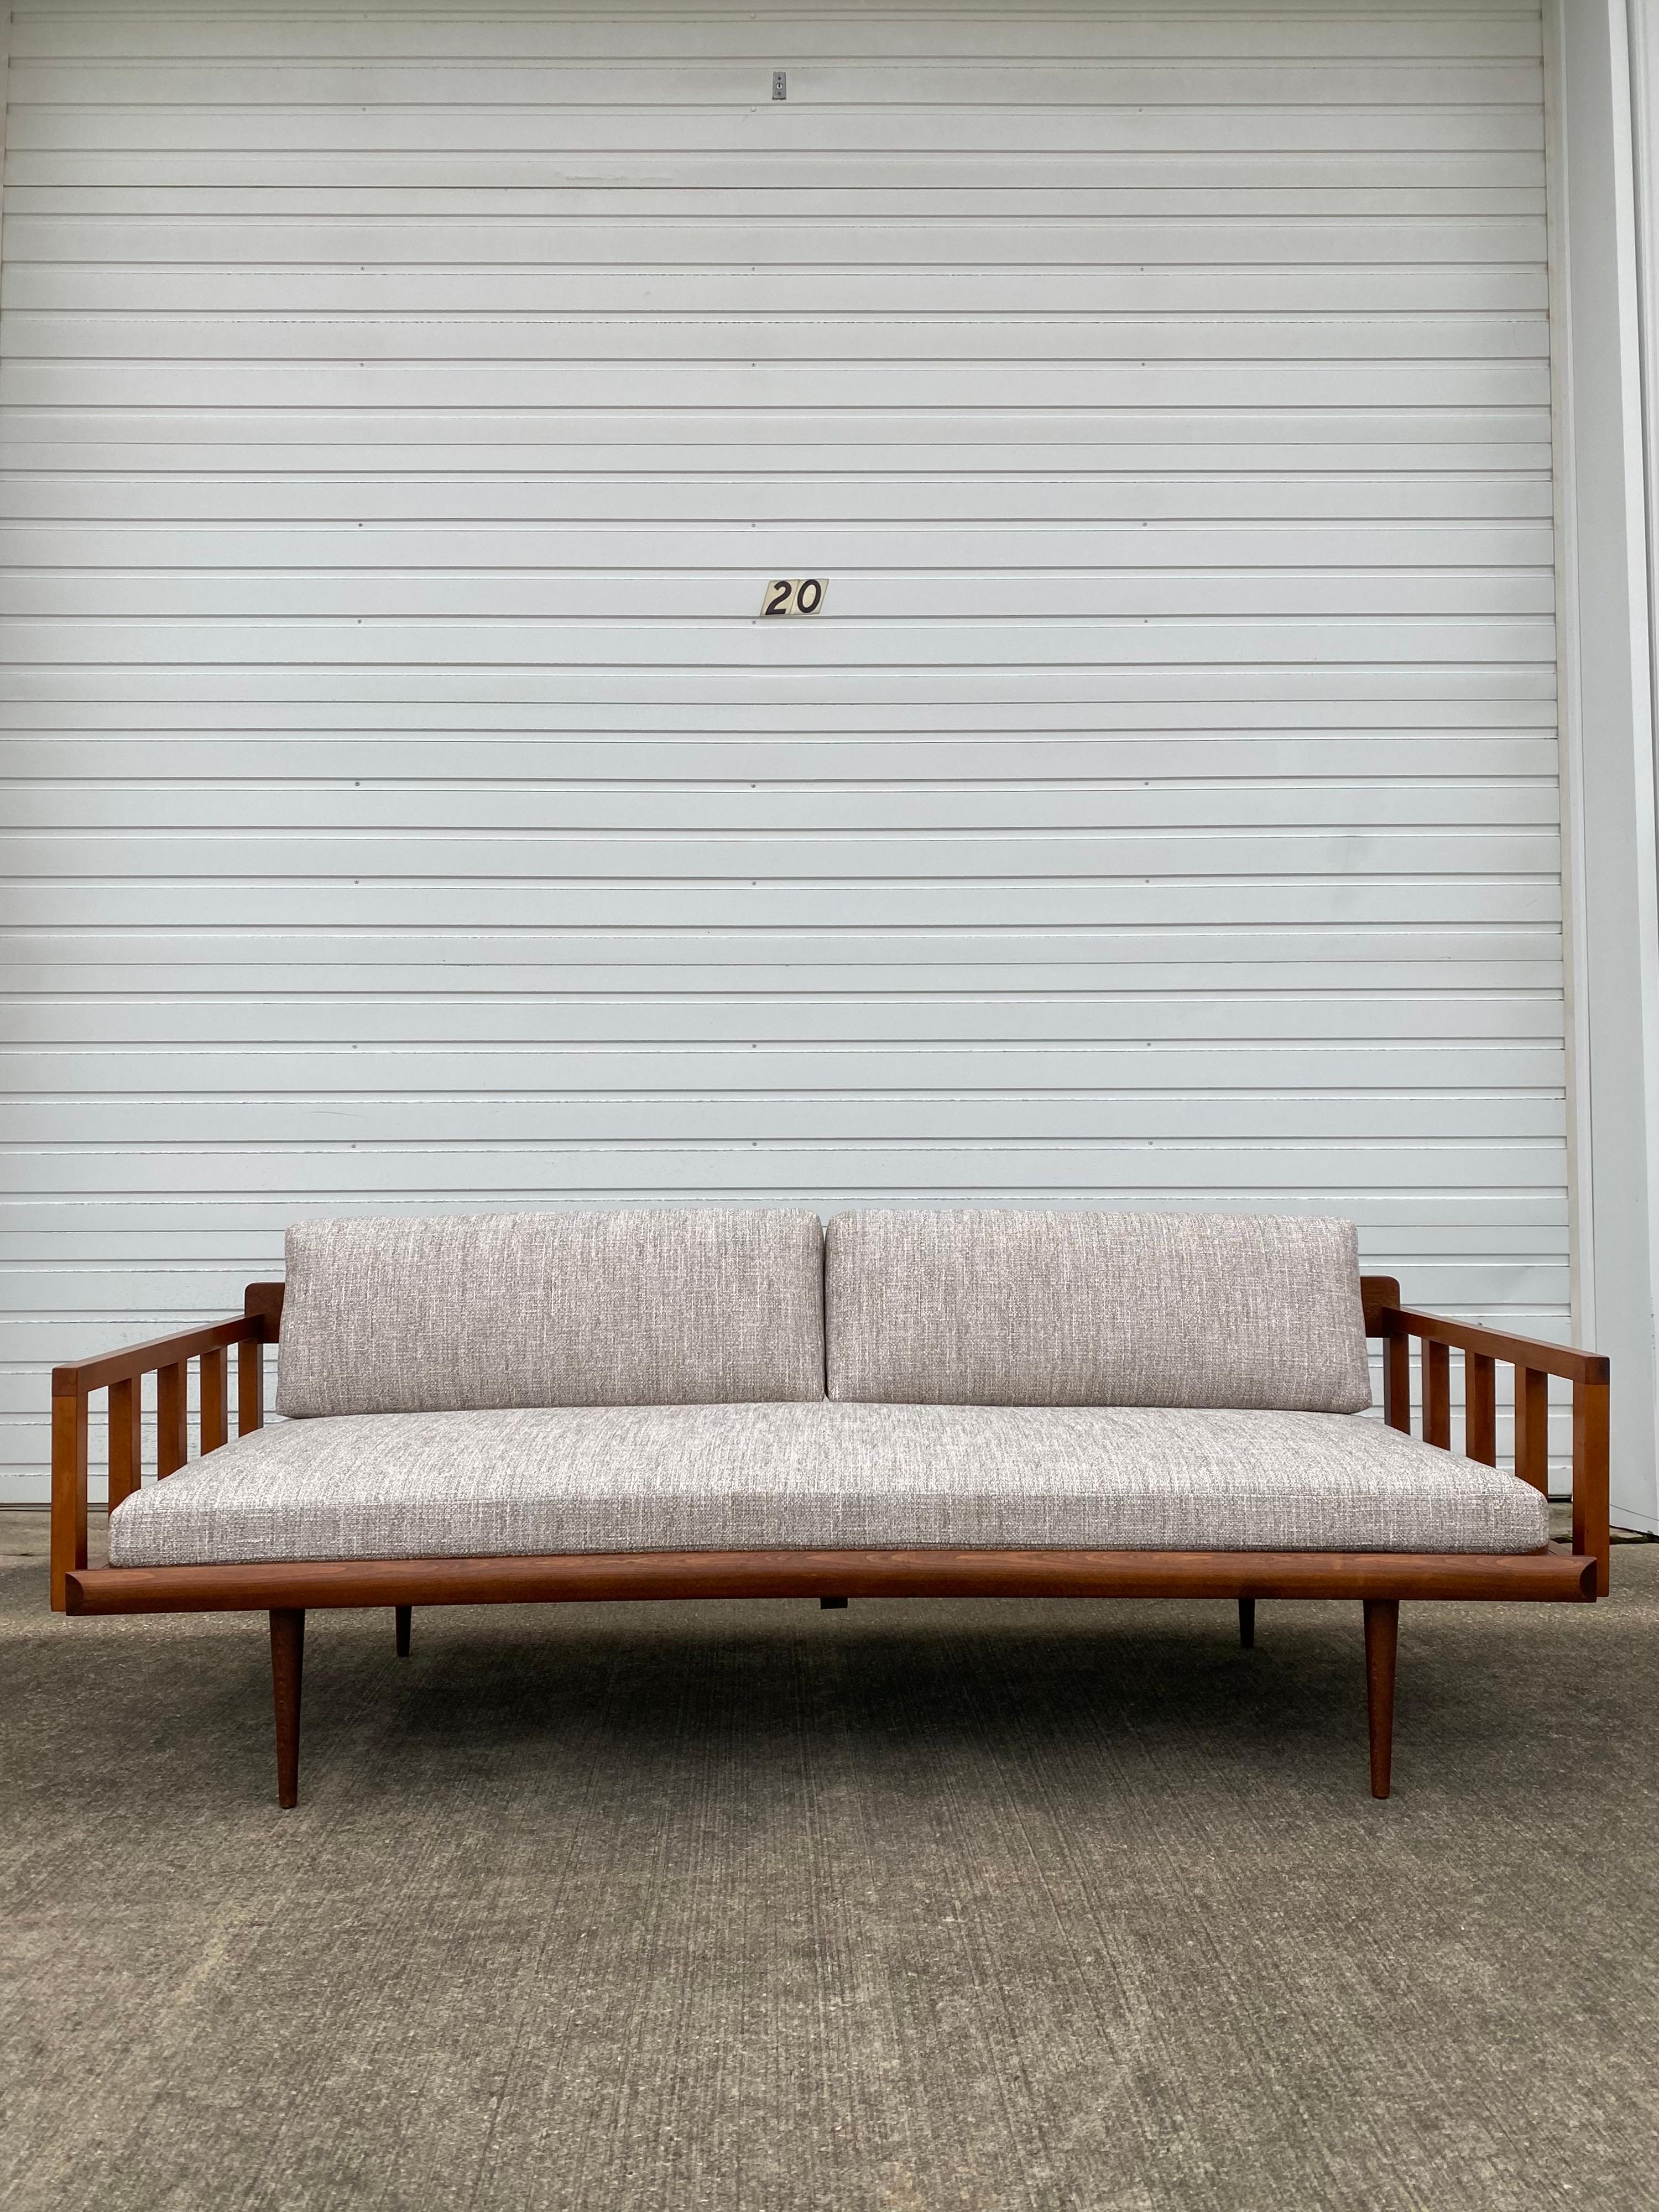 Yugoslavian Mid-century modern teak daybed refinished and reupholstered in a Crypton gray tweed from Greenhouse Fabrics. This piece is in perfect condition and is ready to be an addition to someone’s home.

Additional measurements:

Height without